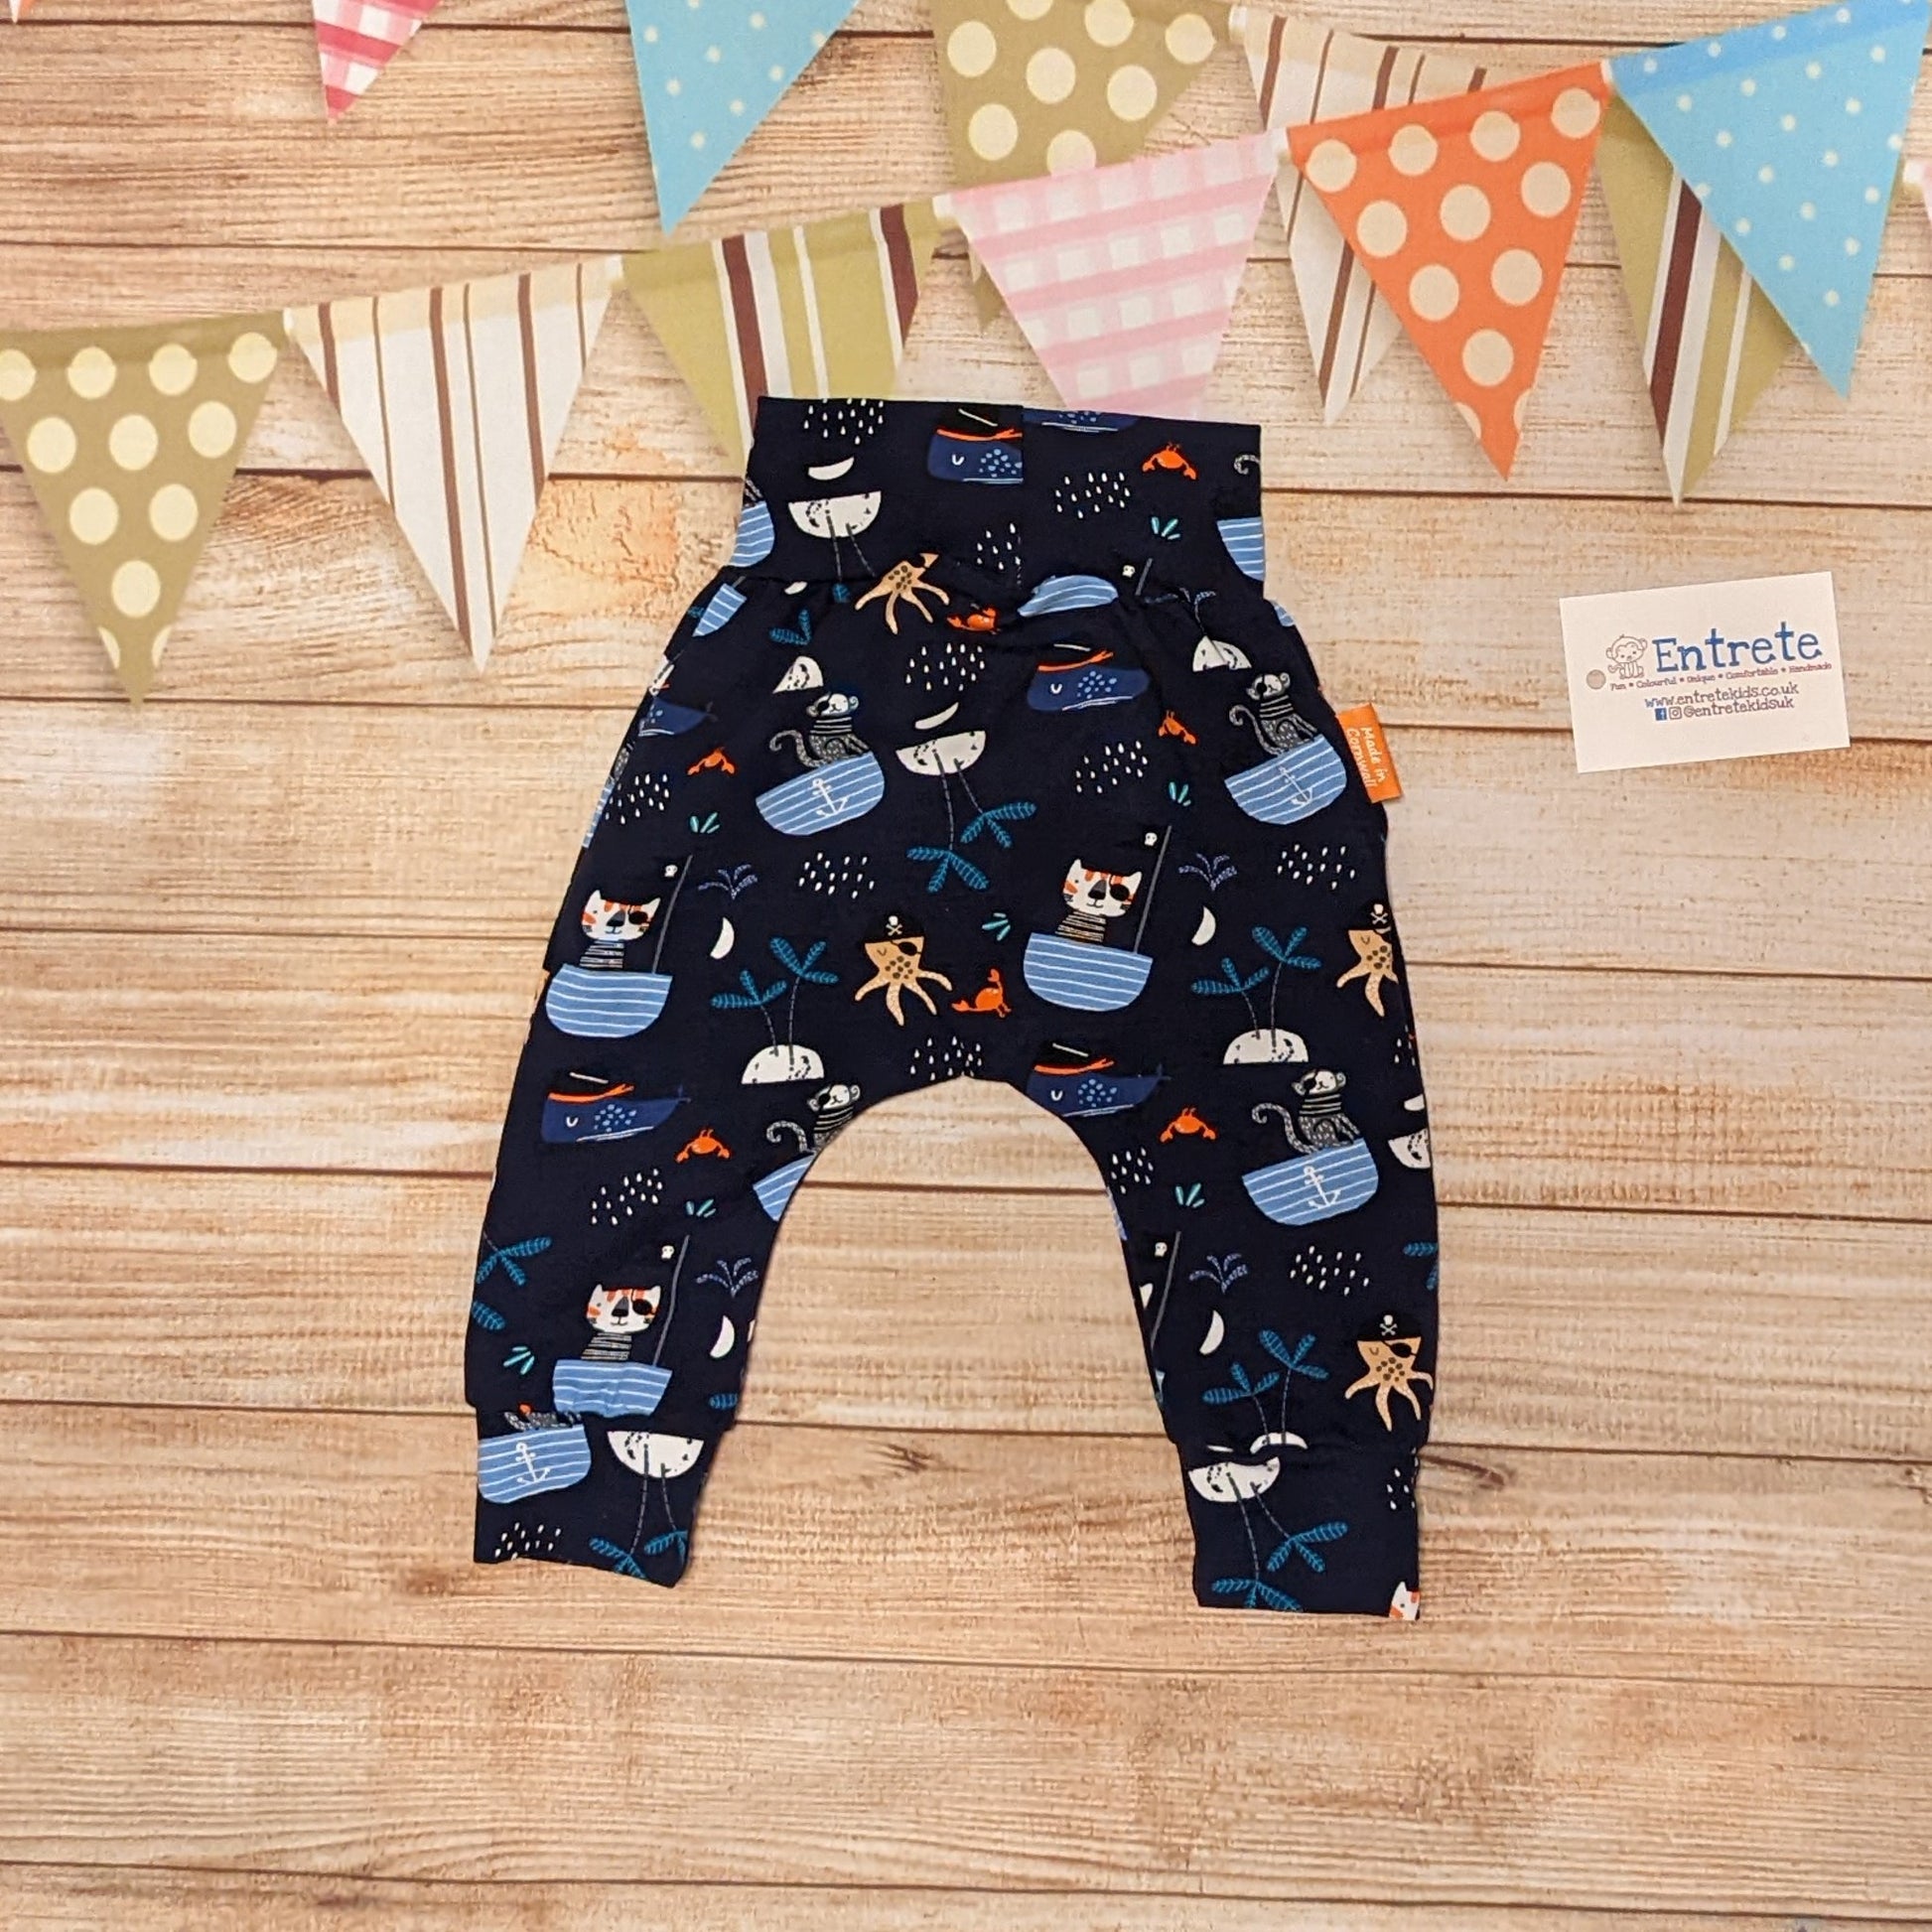 Fun and adventure await, with the pirate cats harem pants. Shown from the rear. Handmade using pirate cats cotton jersey.